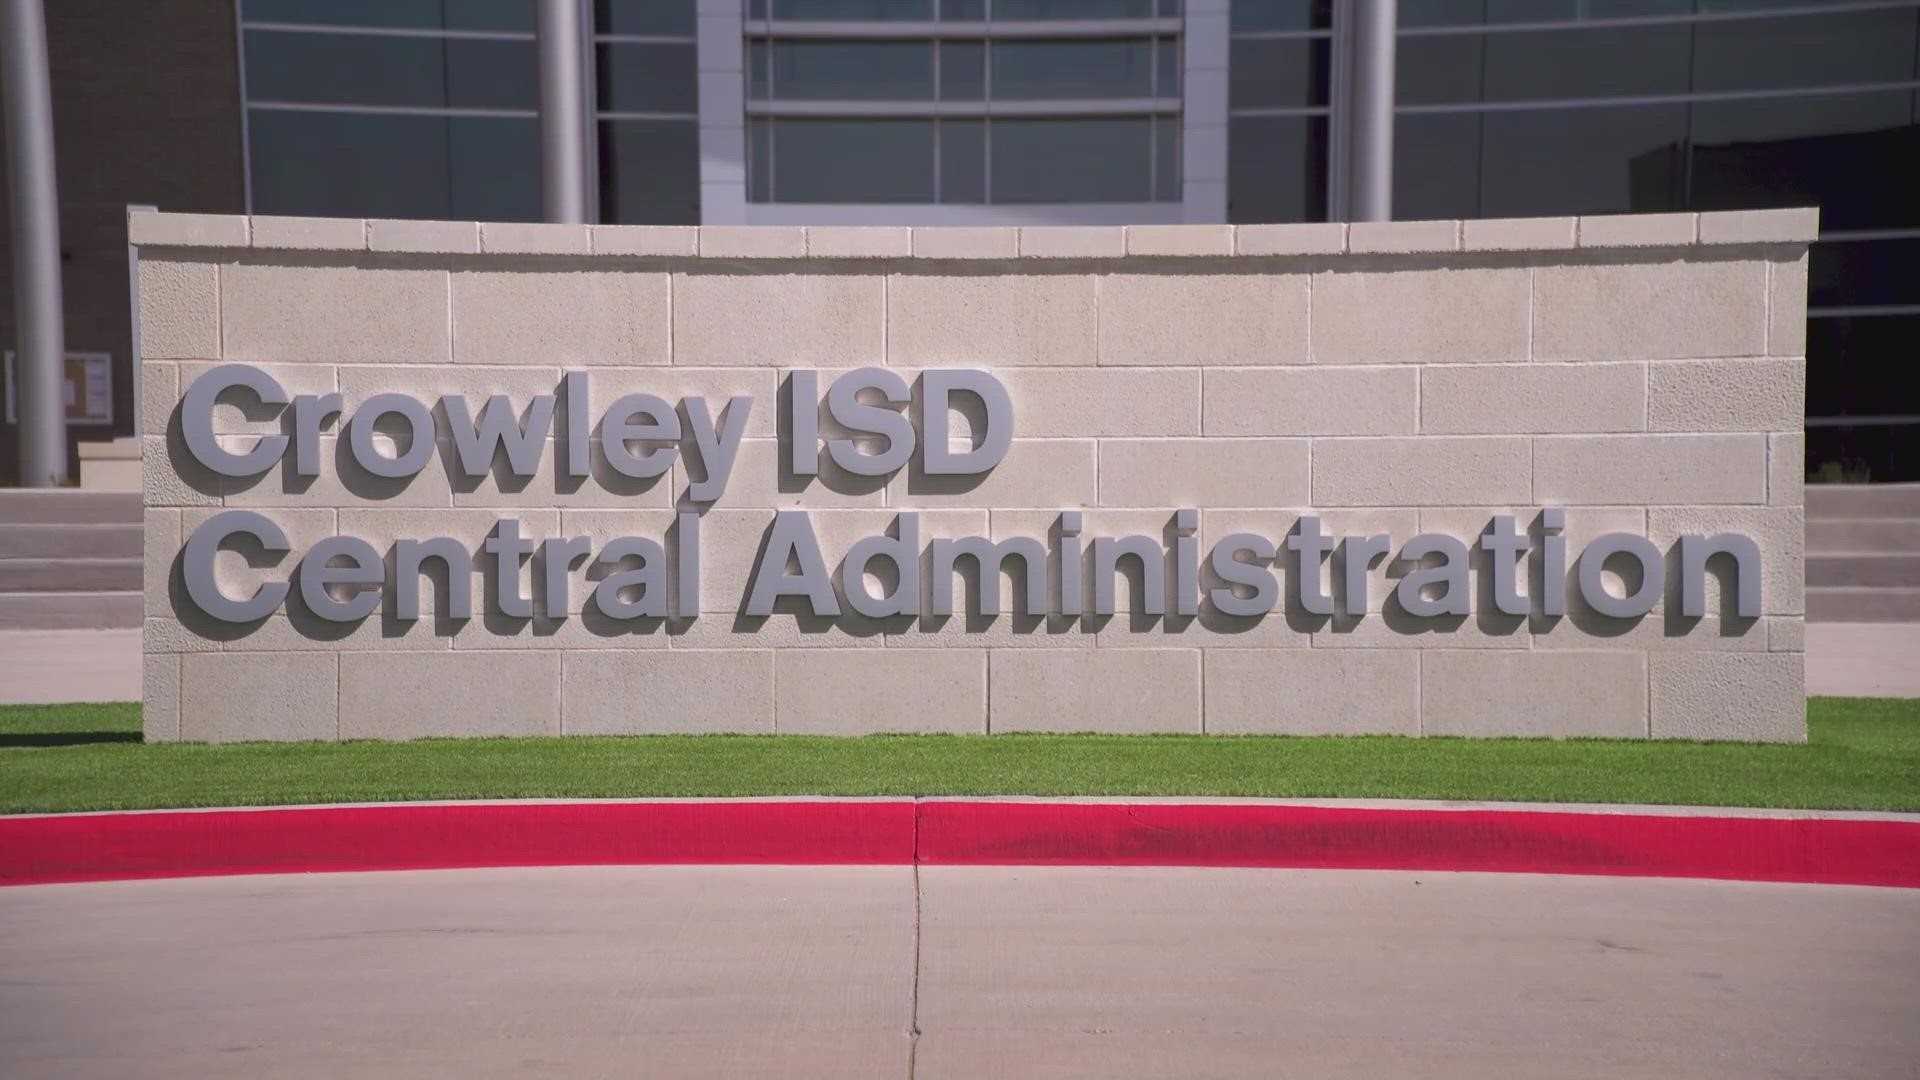 The Crowley ISD said the employee, who was identified by Fort Worth police as Christopher David Session, works at Richard Allie Middle School.